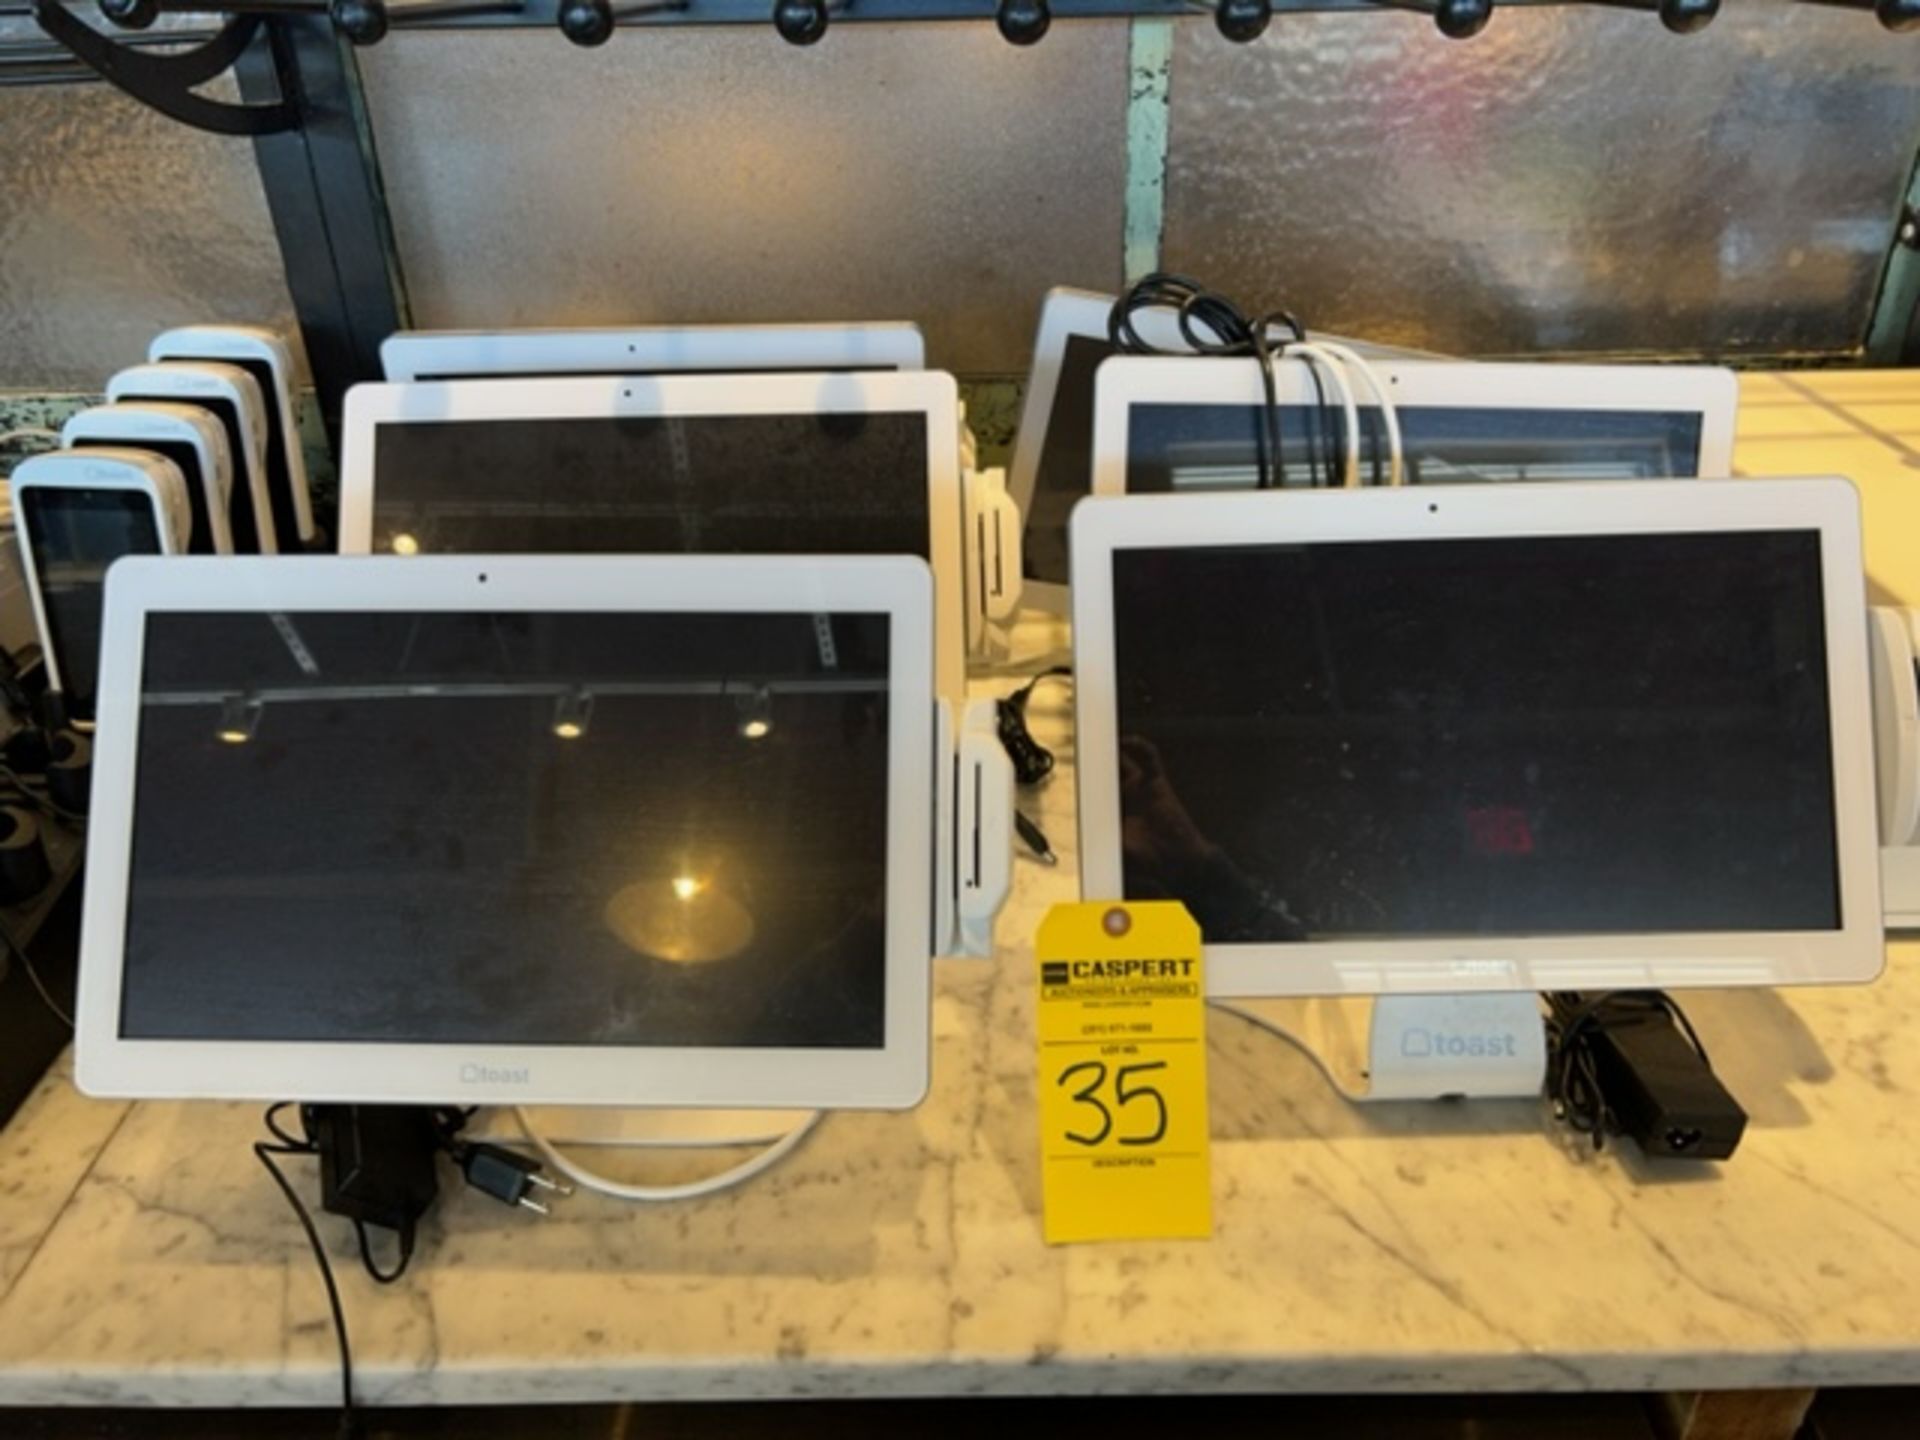 Toast Register System, Consisting of: (2) Cash Draws, (6) Monitors, (2) Tablets, (6) Portable - Image 2 of 7